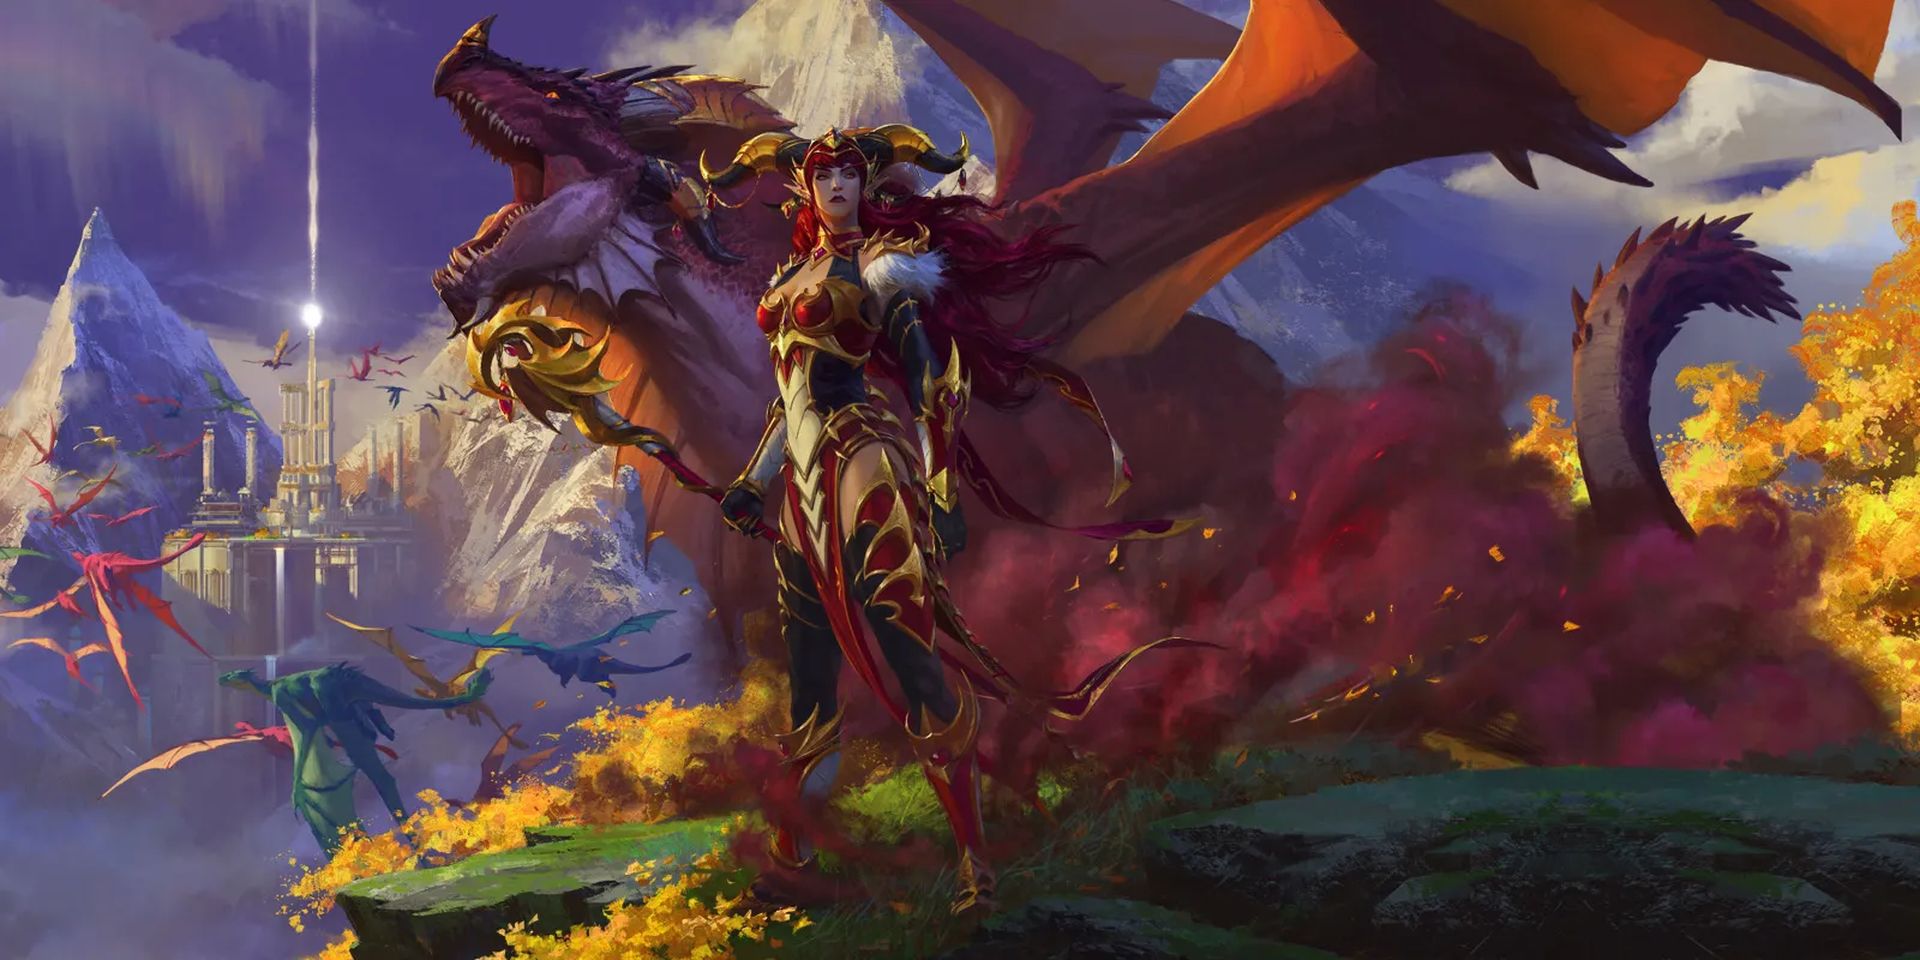 Today, we are going to be taking a look at World of Warcraft Dragonflight raid bosses in Vault of the Incarnates, as well as their item level requirements.